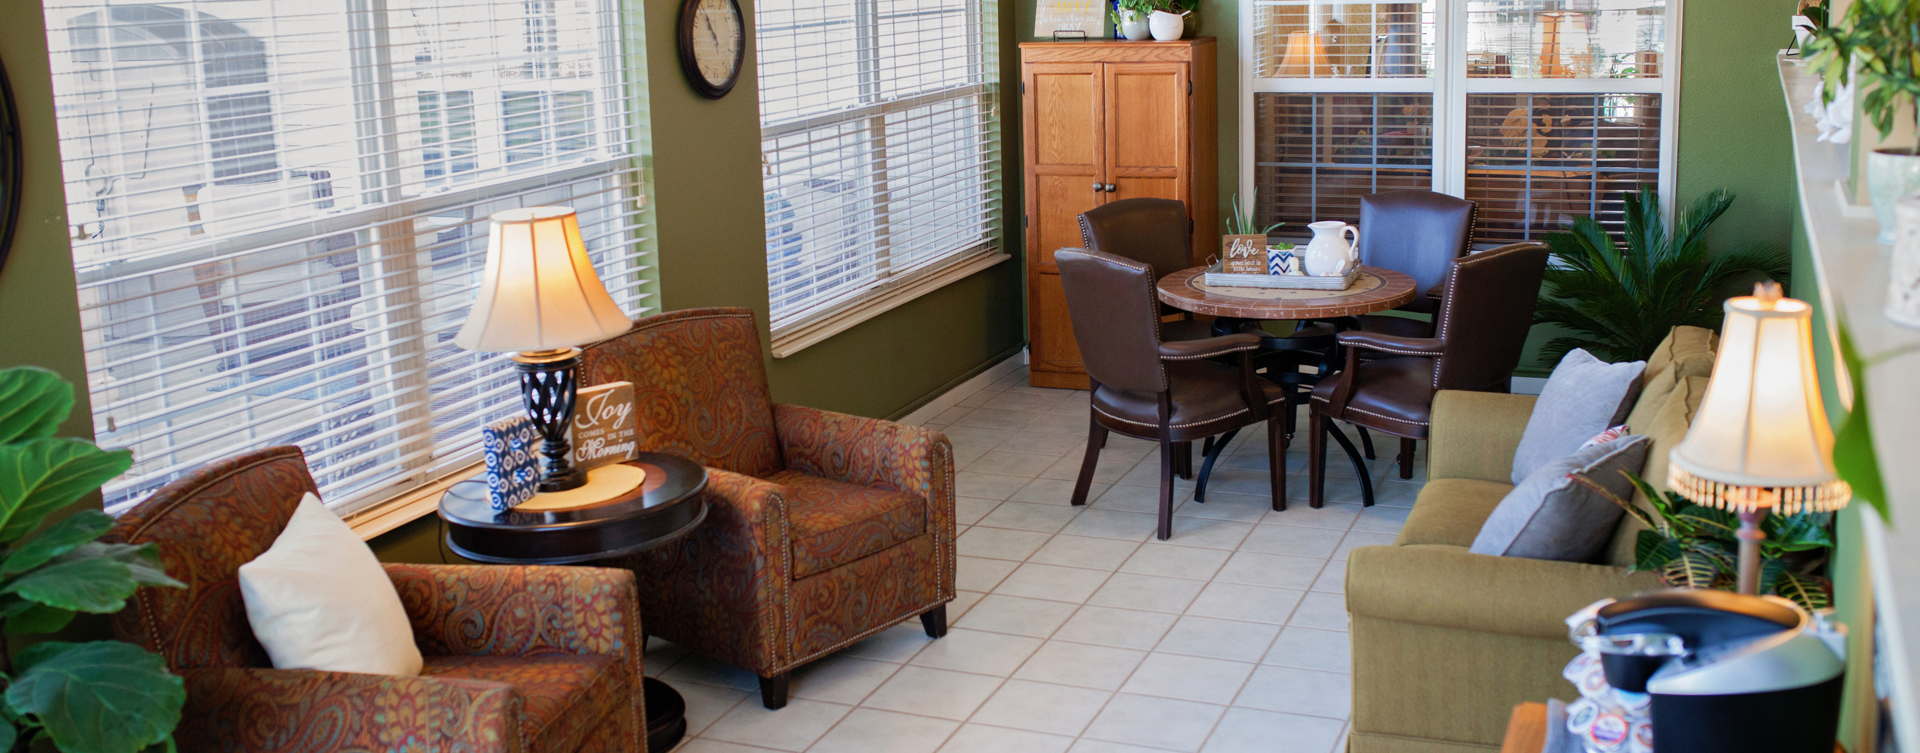 Relax in the warmth of the sunroom at Bickford of Marion